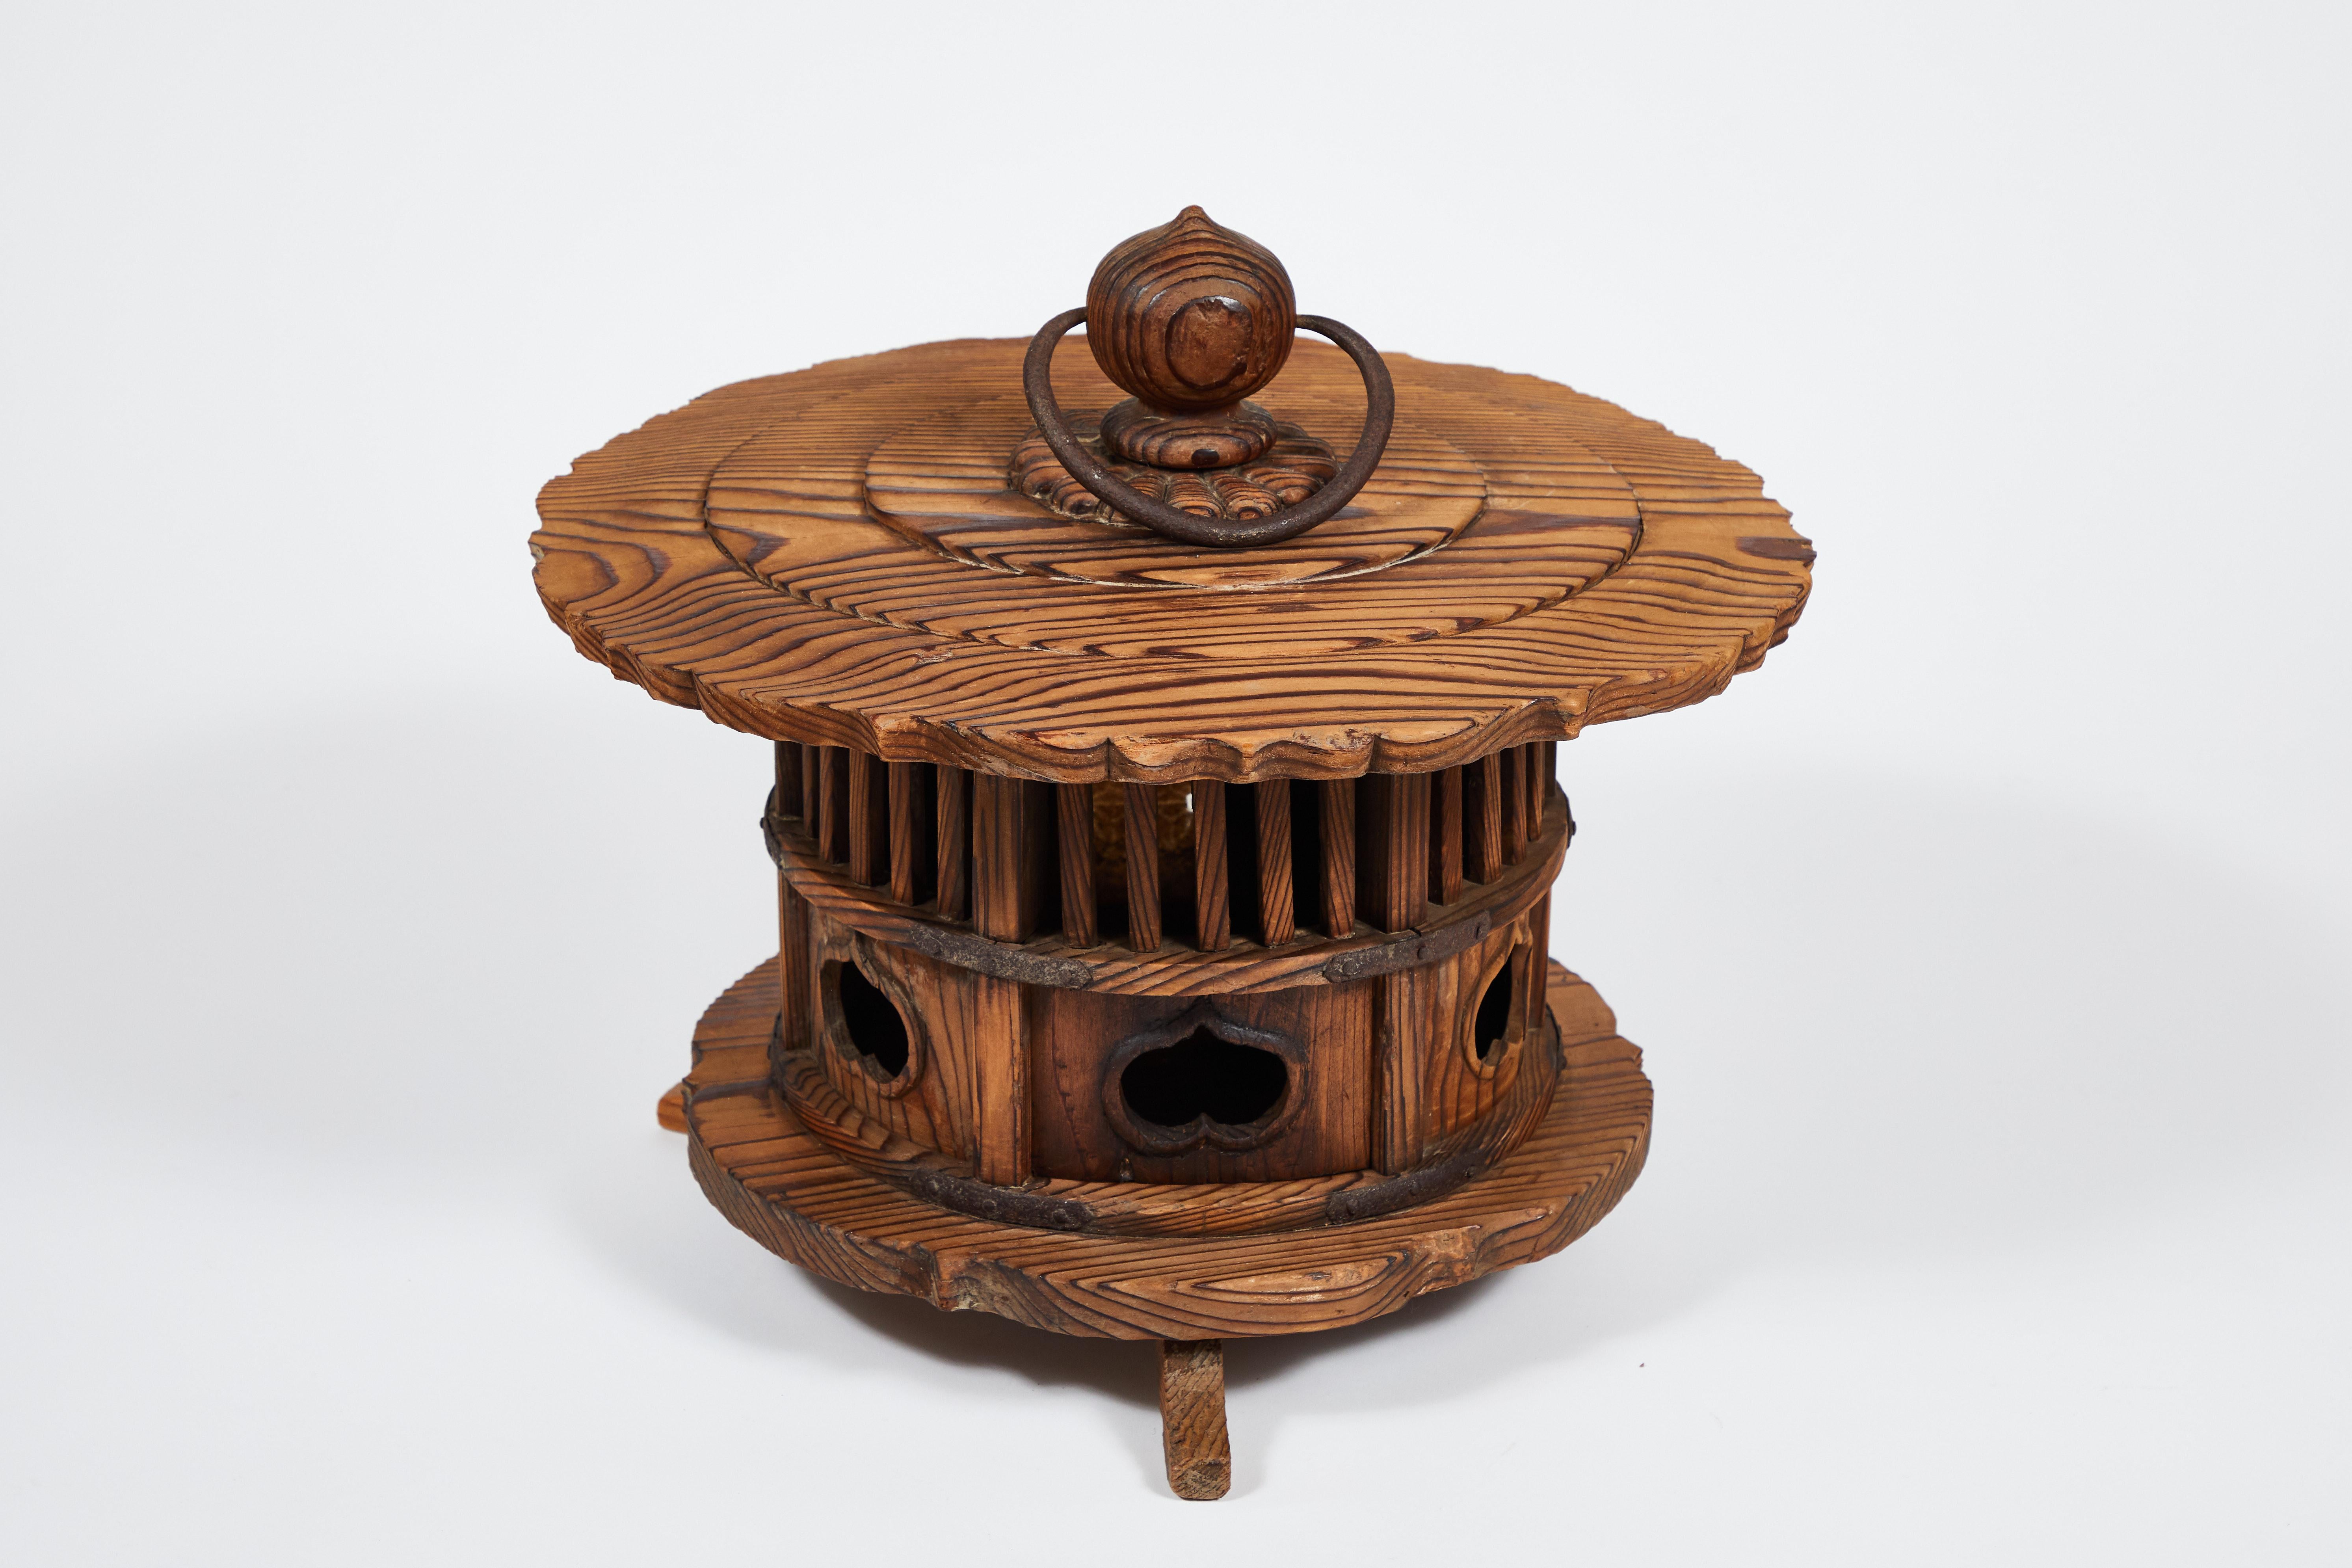 This is a hand carved cedar wood (jindai sugi) pagoda-stype round andon or lantern with bronze fittings and ring handle, circa 1860-1880 (Edo to Meiji period). Hand carved with big dramatic grain and a rippling roof, this was a garden or temple